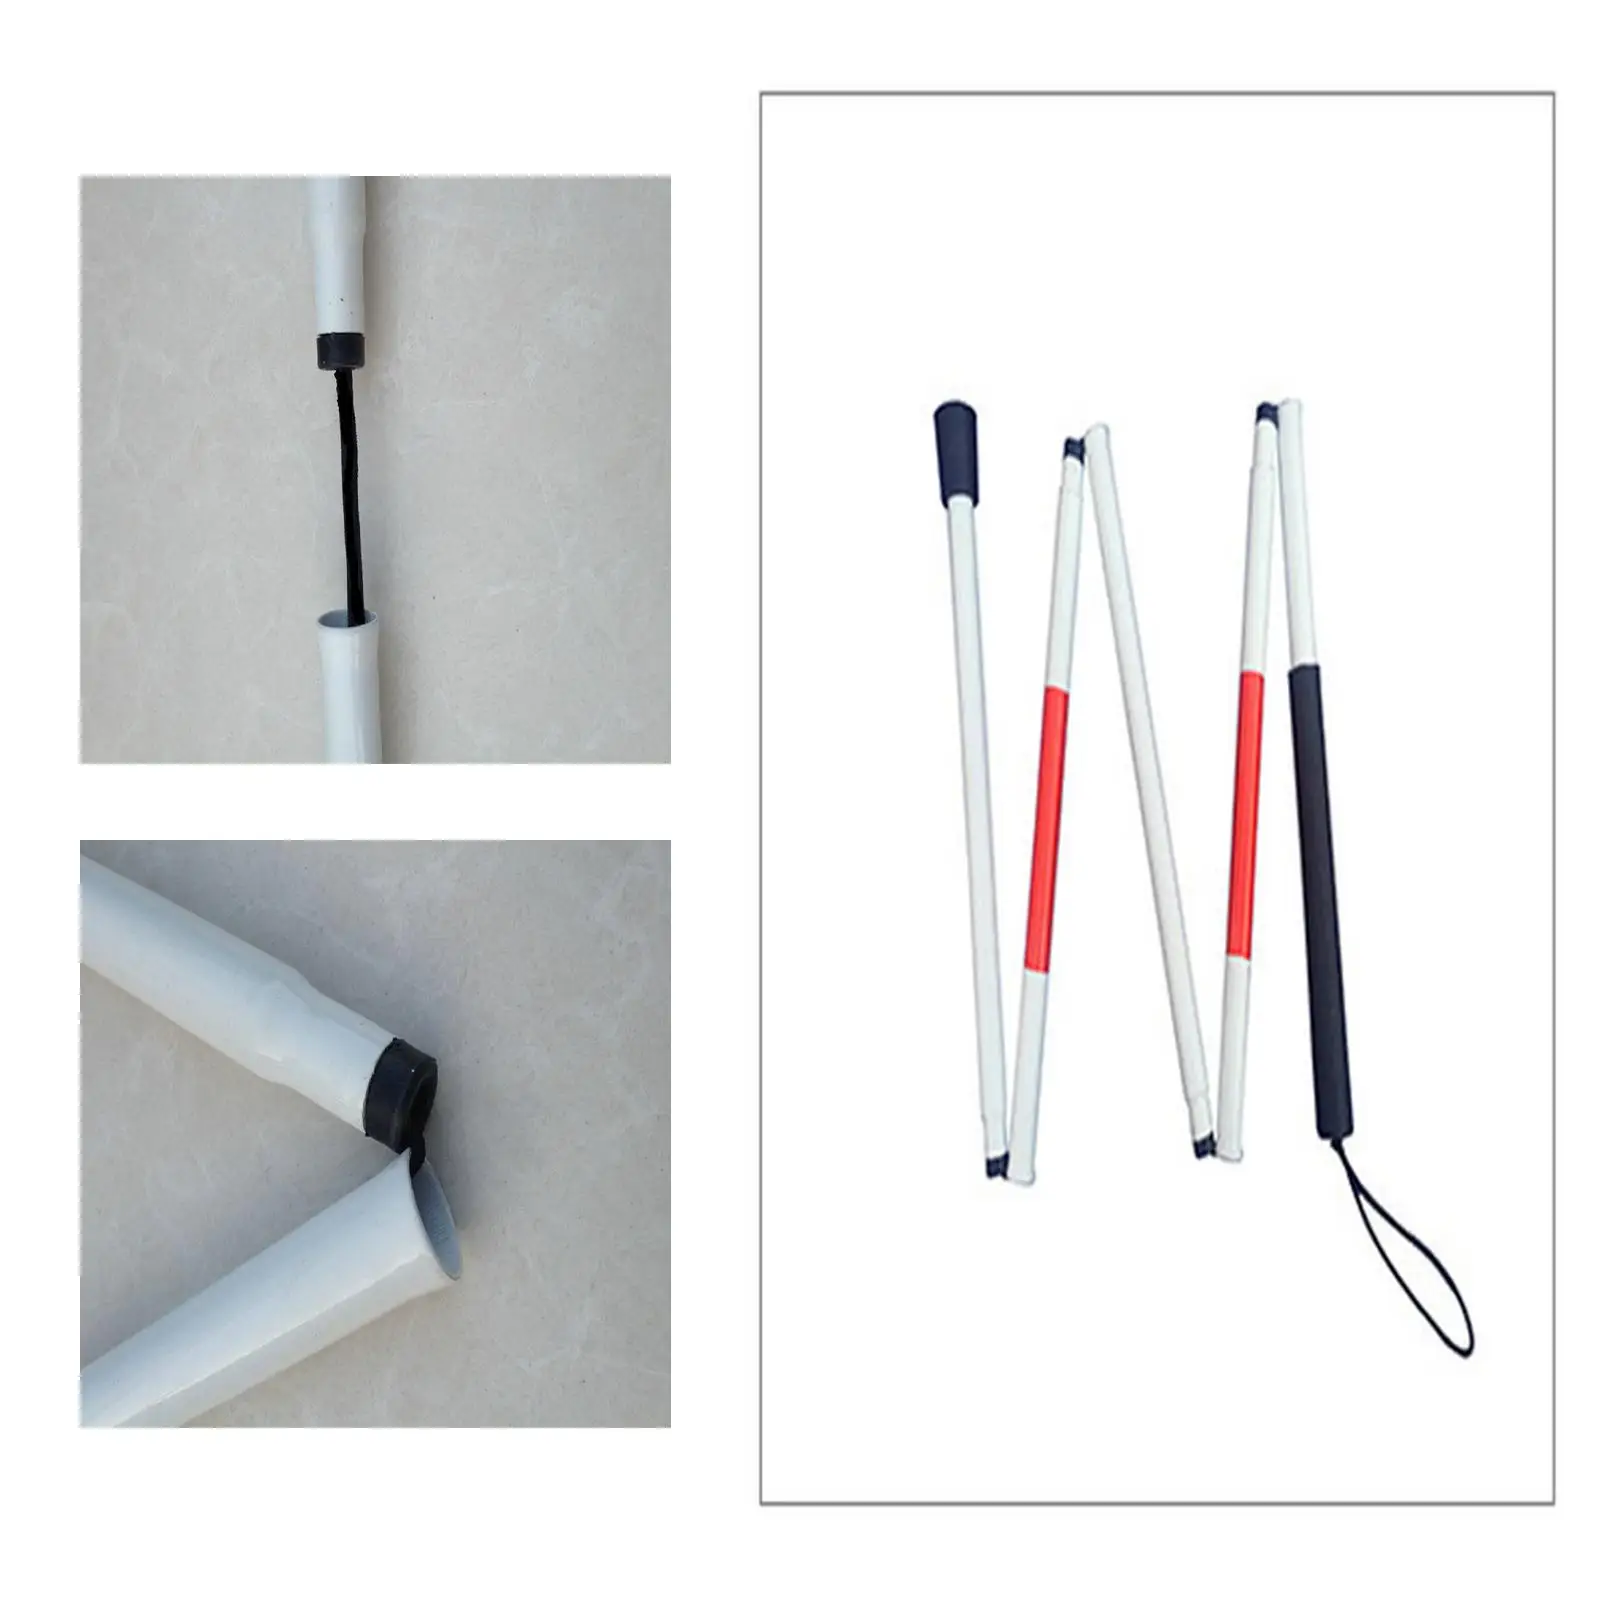 Folding Blind Cane Red and White with Red Reflective Tape for Outdoor Hiking